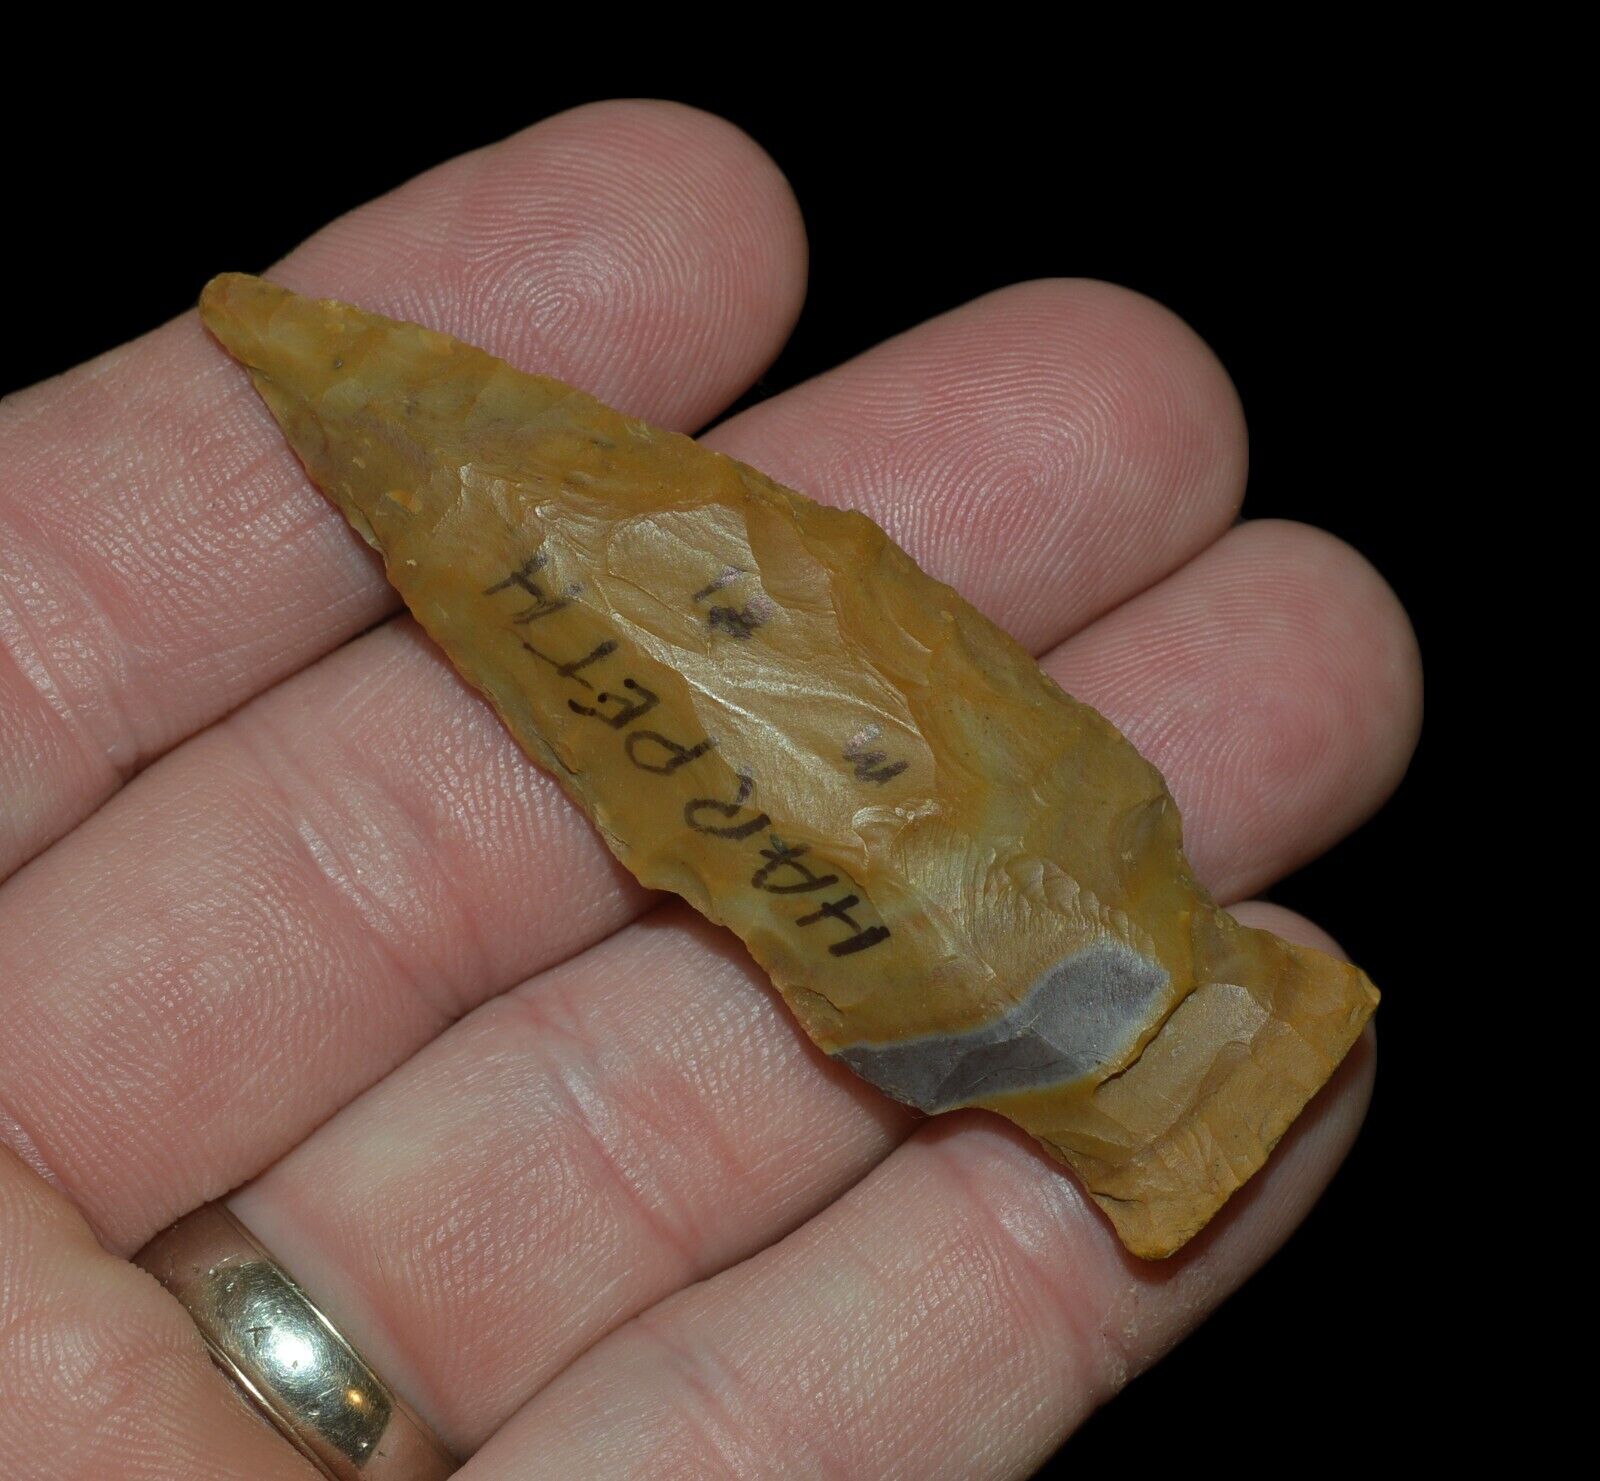 HARPETH RIVER TENNESSEE AUTHENTIC INDIAN ARROWHEAD ARTIFACT COLLECTIBLE RELIC